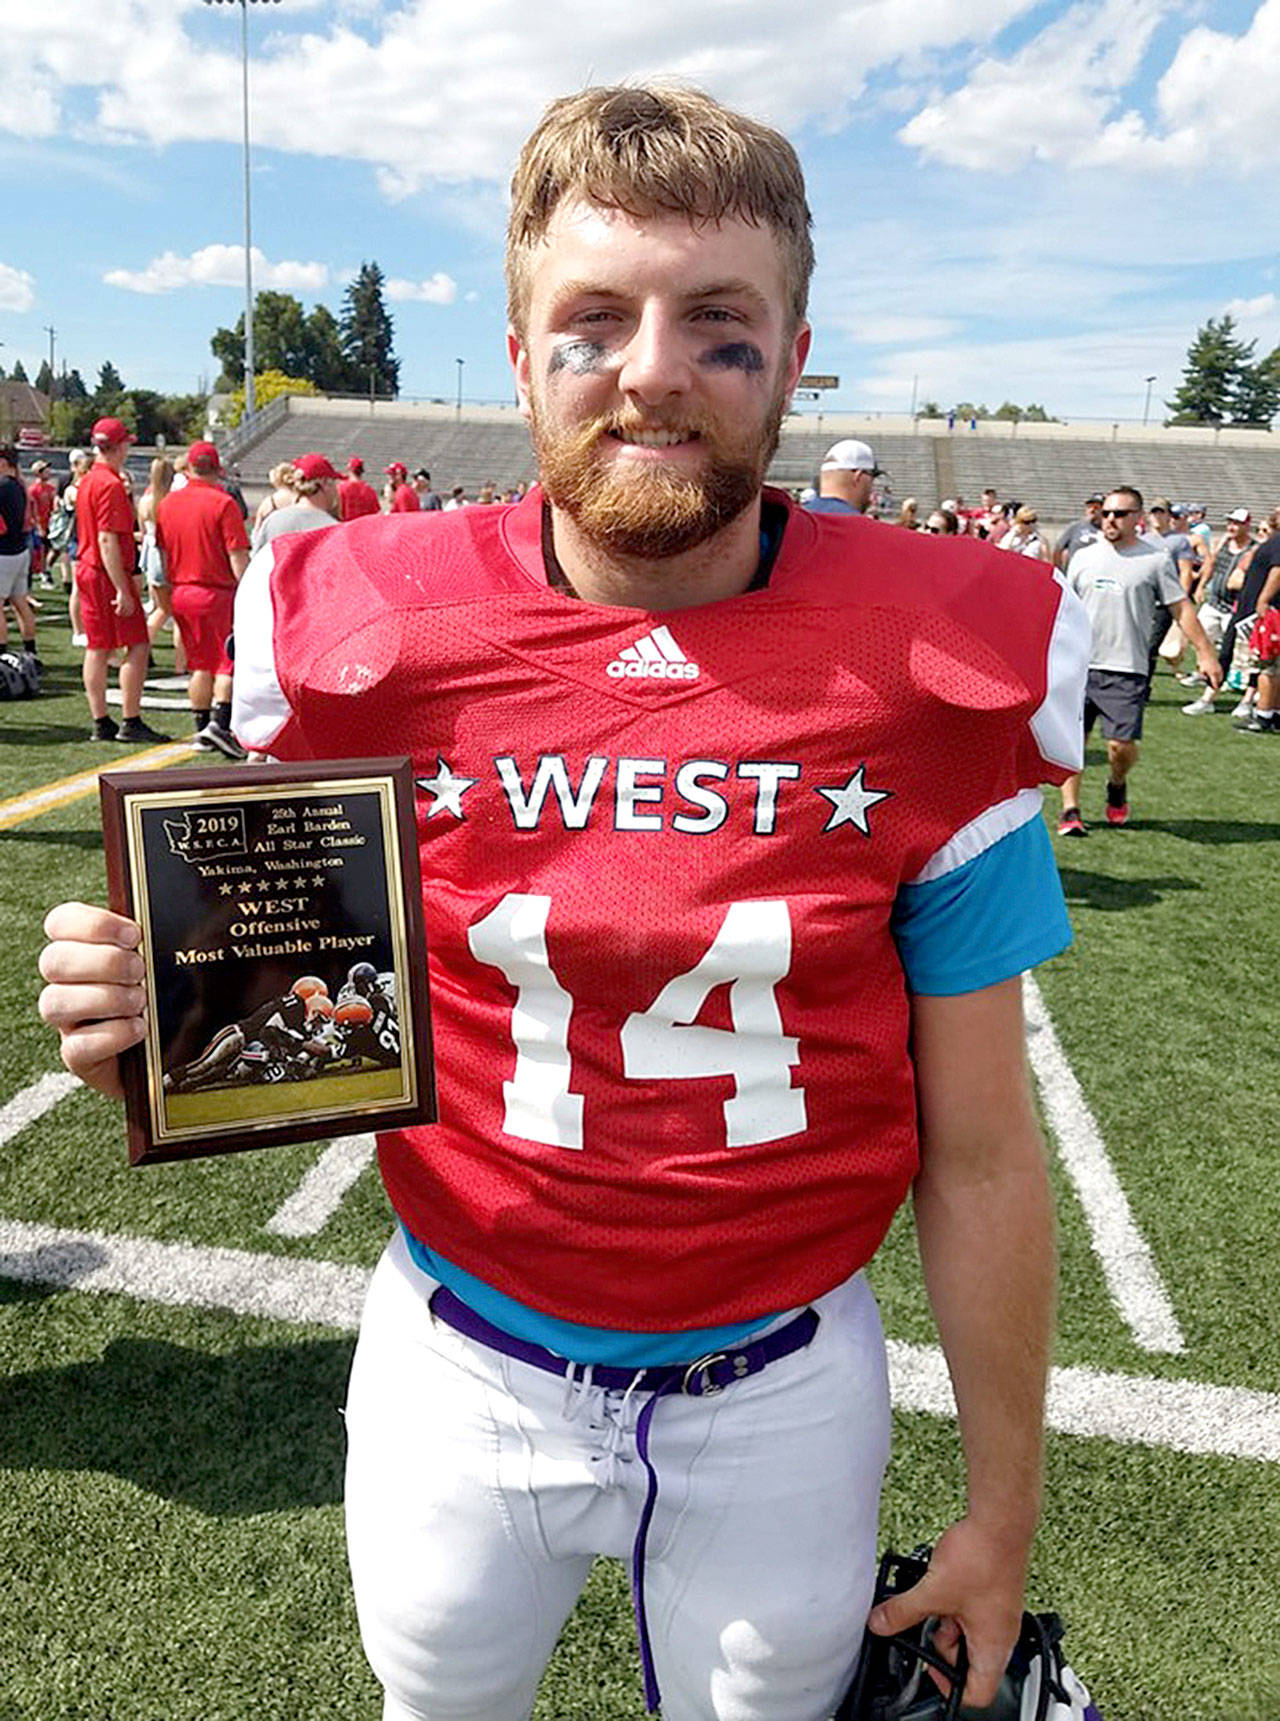 Sequim’s Riley Cowan was named the West Team’s offensive MVP in the 25th annual Earl Barden All-Star Classic. Cowan rushed for 35 yards and threw a touchdown pass for the West.